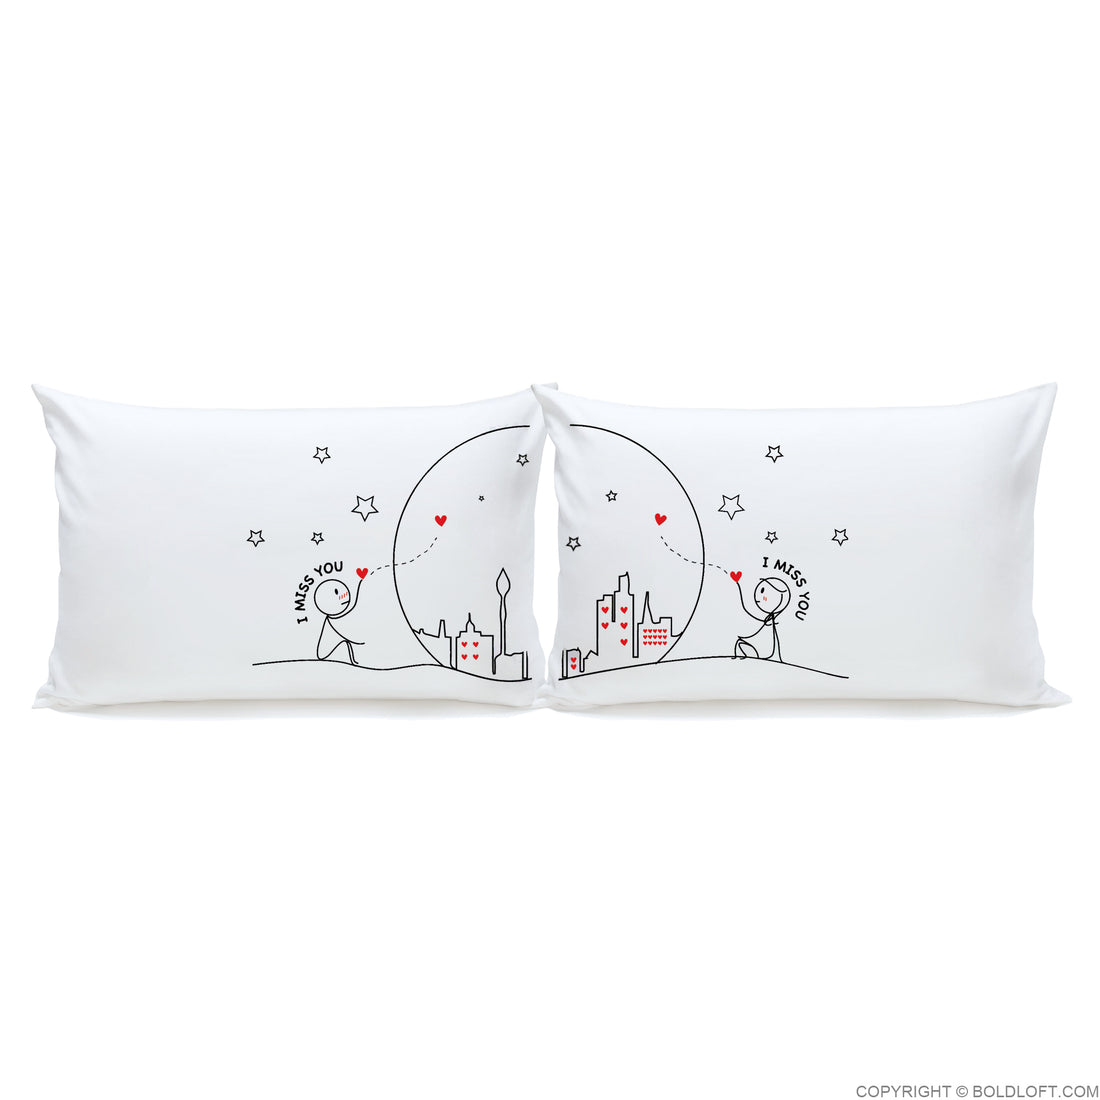 Miss Us Together™ Couple Pillowcase Set